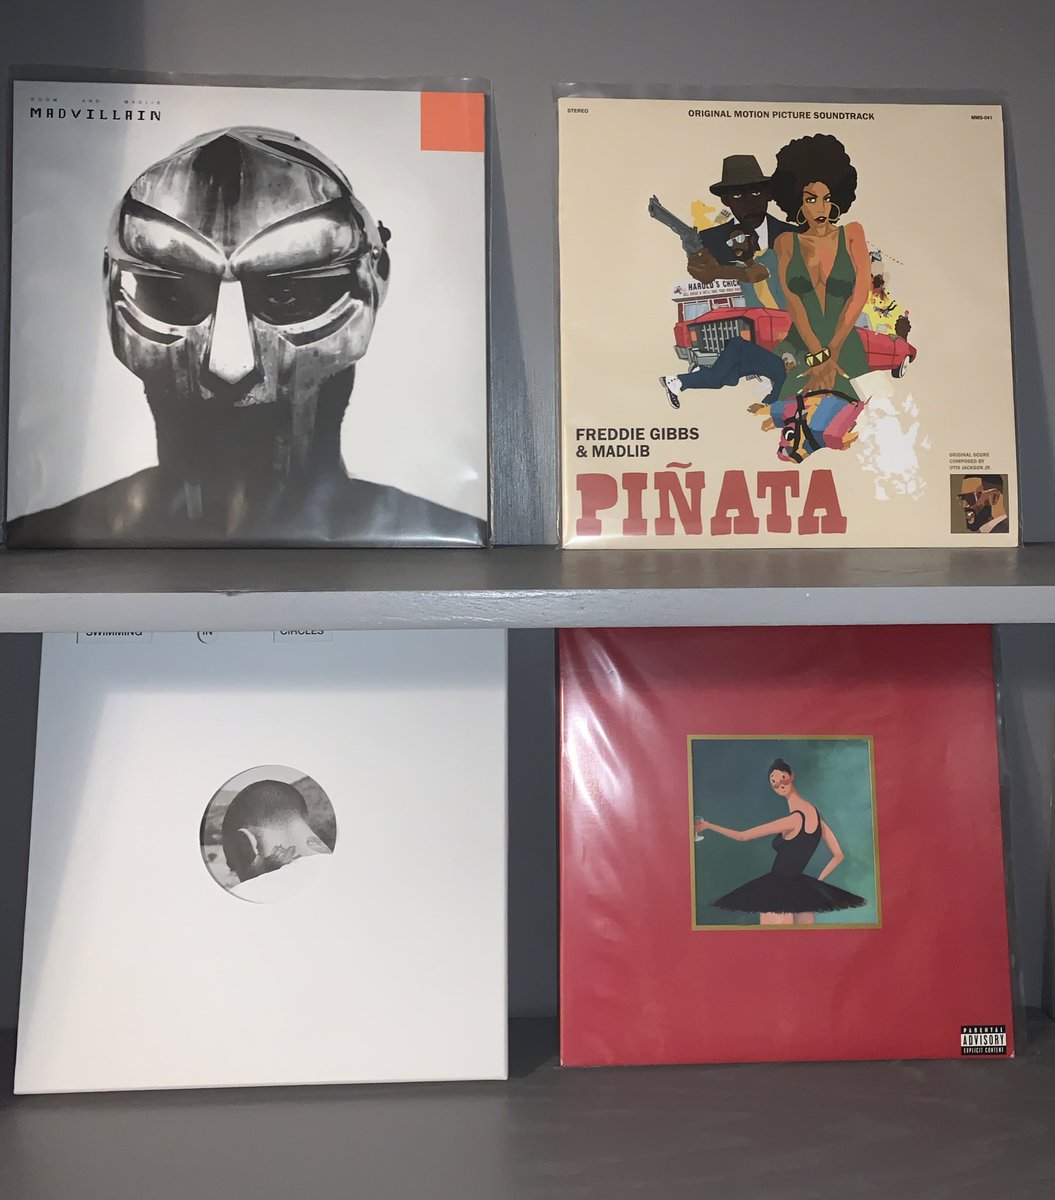 finally after 4 months of collecting records, i made a vinyl collection thread: